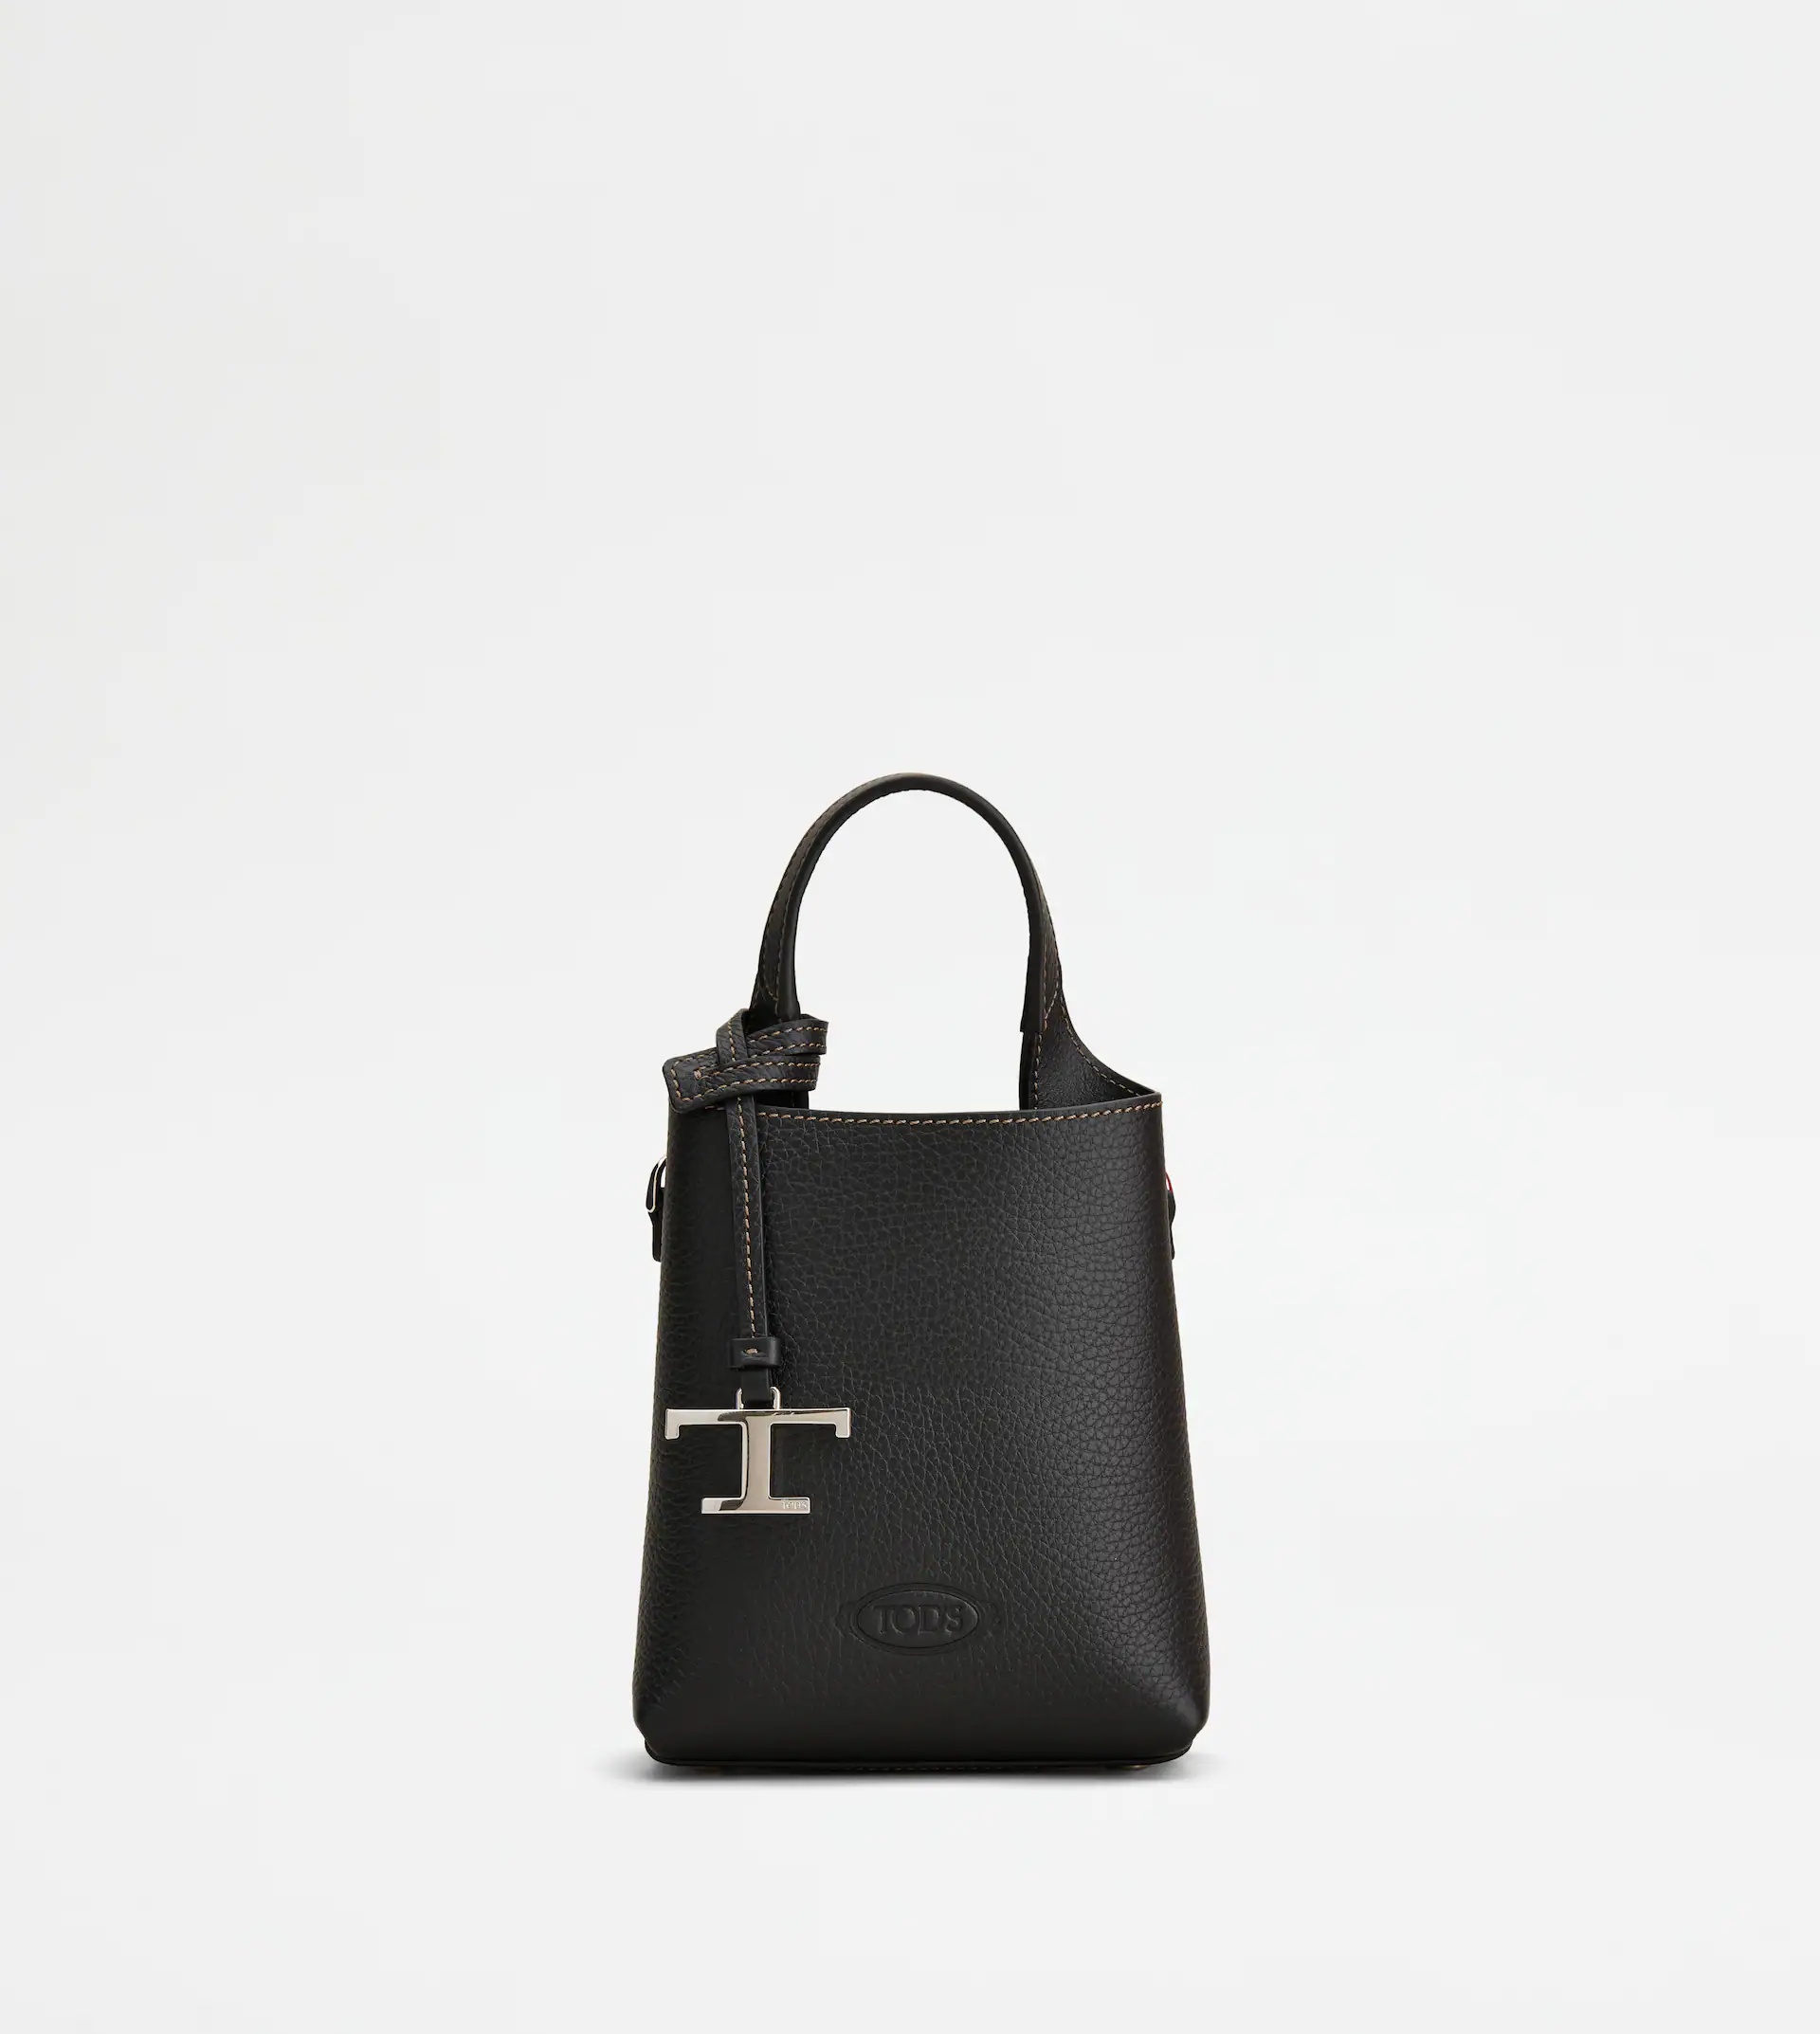 TOD'S MICRO BAG IN LEATHER - BLACK - 1